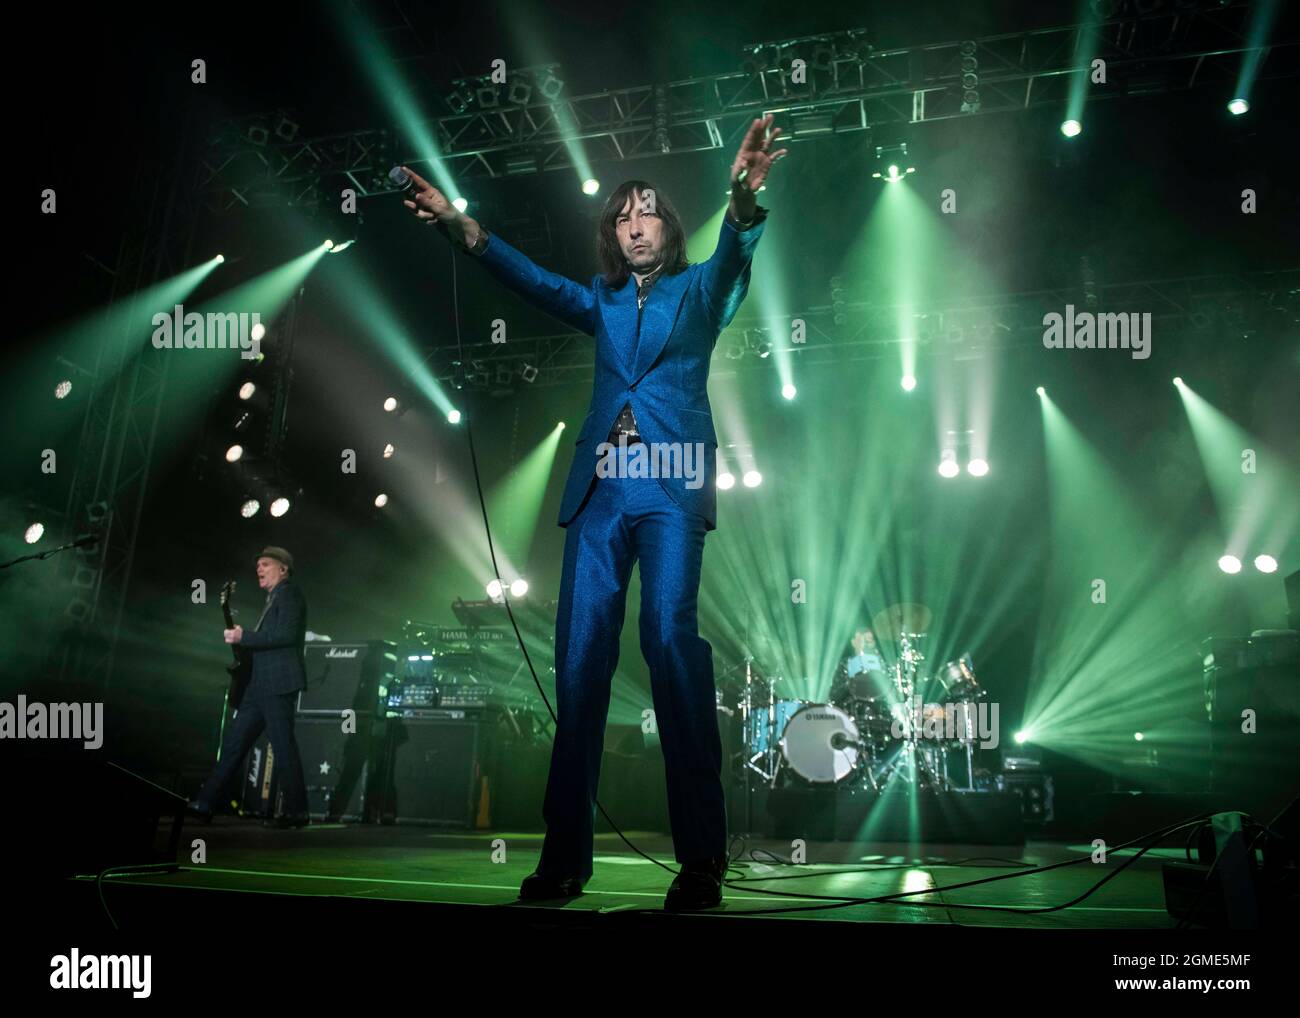 Newport, Isle of Wight, UK, Friday, 17th September 2021 Bobbie Gillespie from Primal Scream performs live at the Isle of Wight festival Seaclose Park. Credit: DavidJensen / Empics Entertainment / Alamy Live News Stock Photo